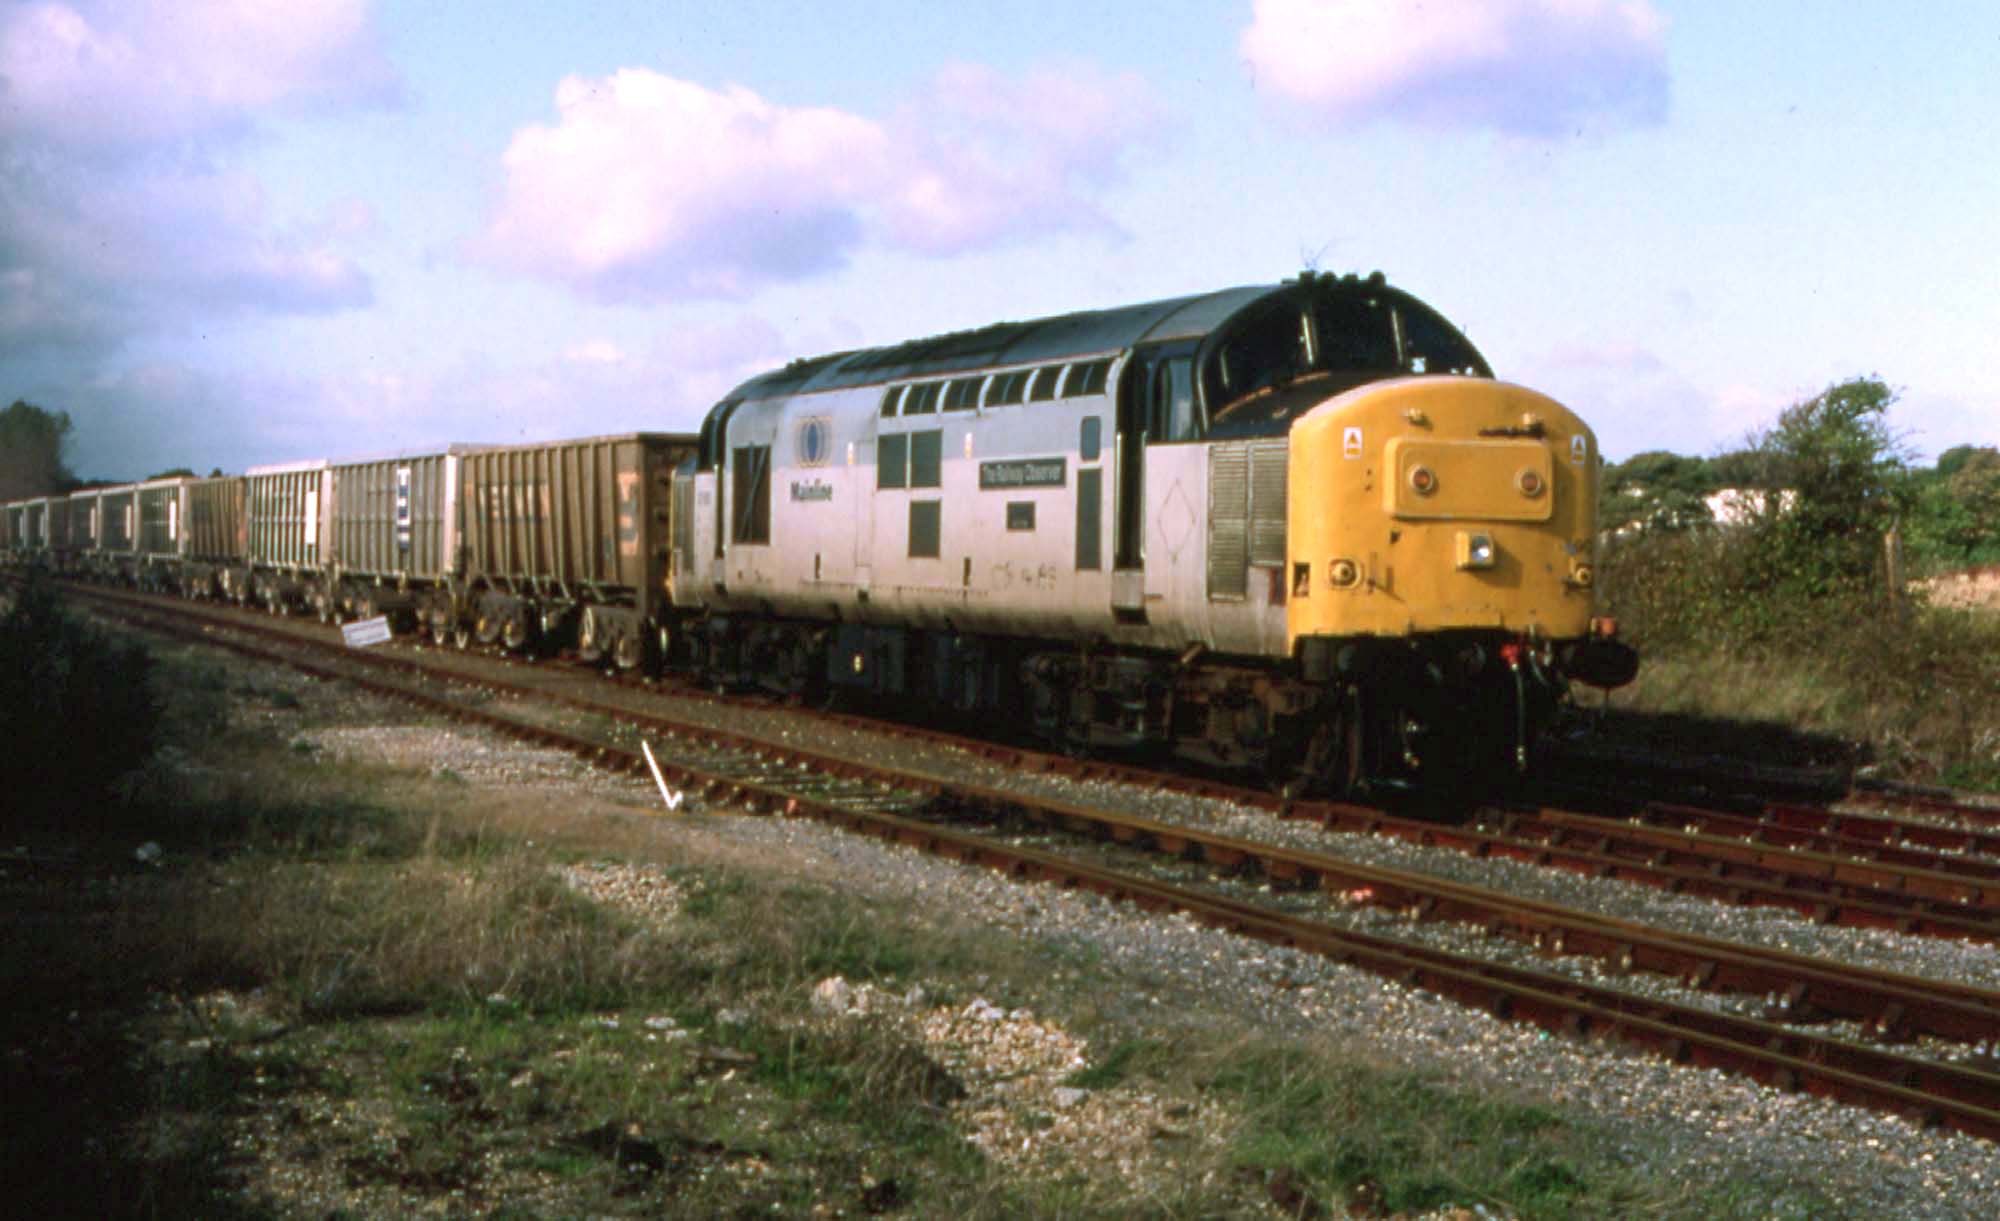 37890 on Merehead to Hamworthy stone train, 17th October 1998. Martyn Thresh
After unloading at the terminal near Hamworthy Junction, the train runs the full length of the branch to allow the locomotive to run round.